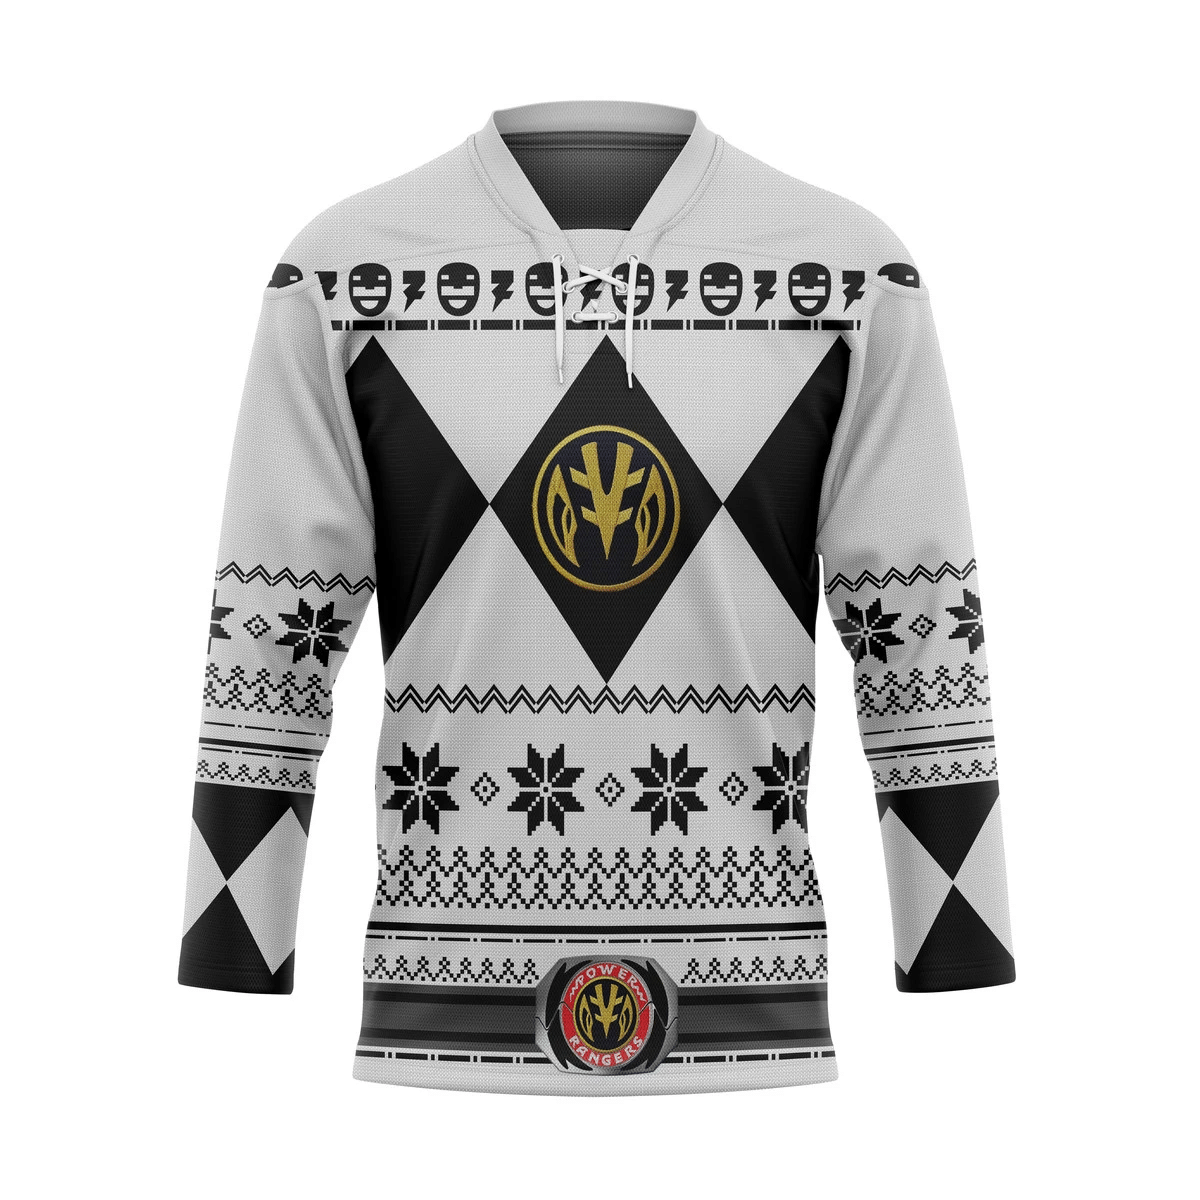 Top hot hockey jersey for NHL fans You can find out more at the bottom of the page! 40